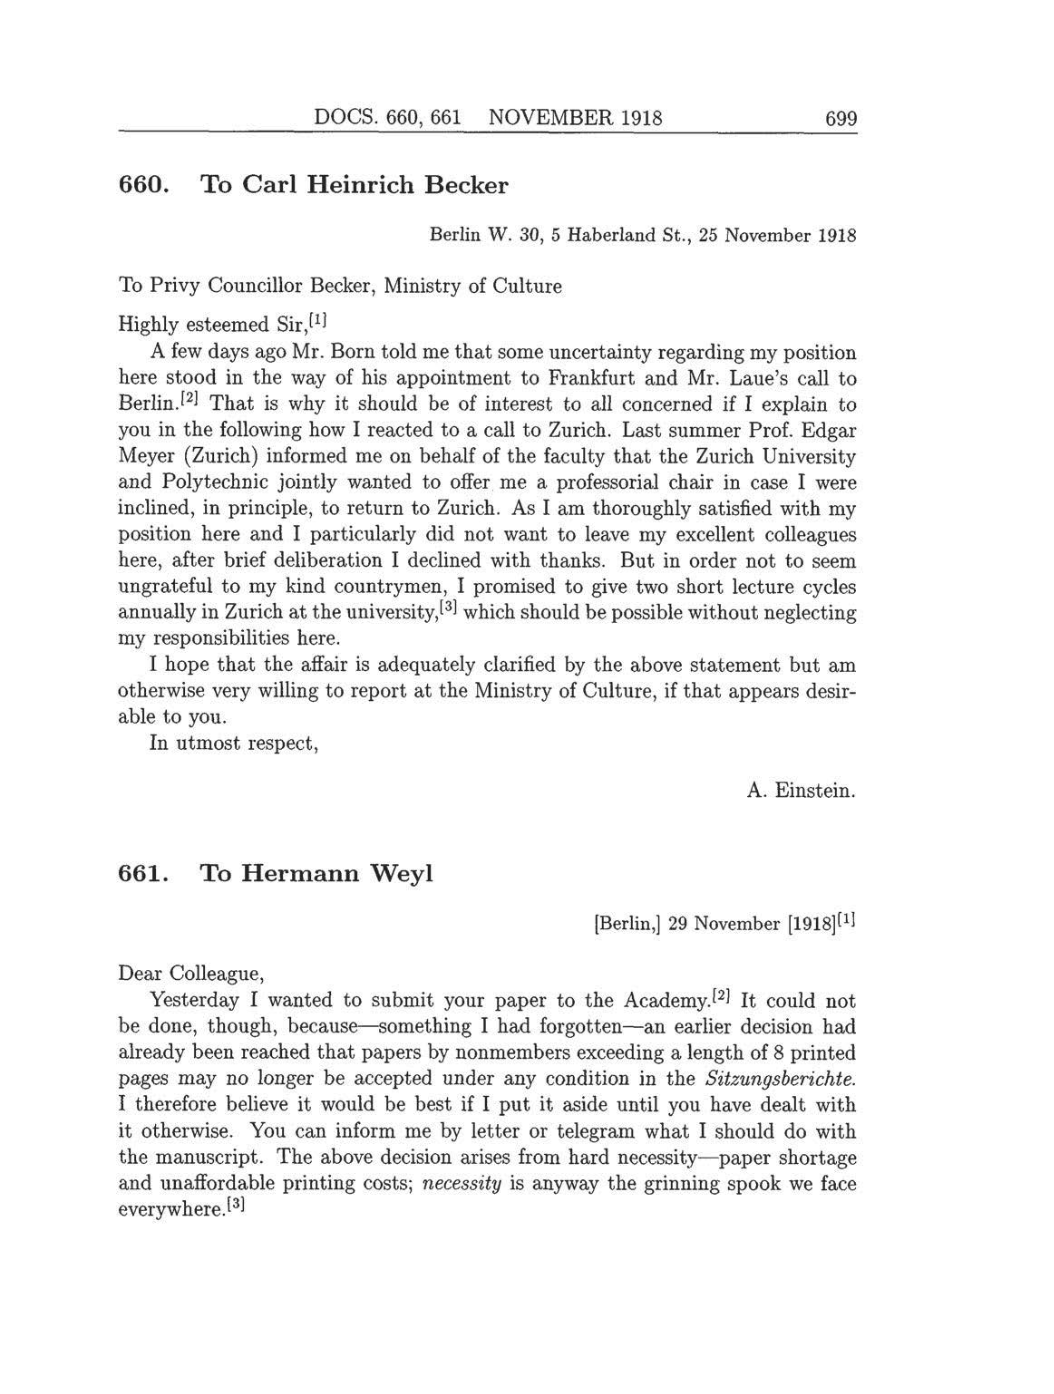 Volume 8: The Berlin Years: Correspondence, 1914-1918 (English translation supplement) page 699